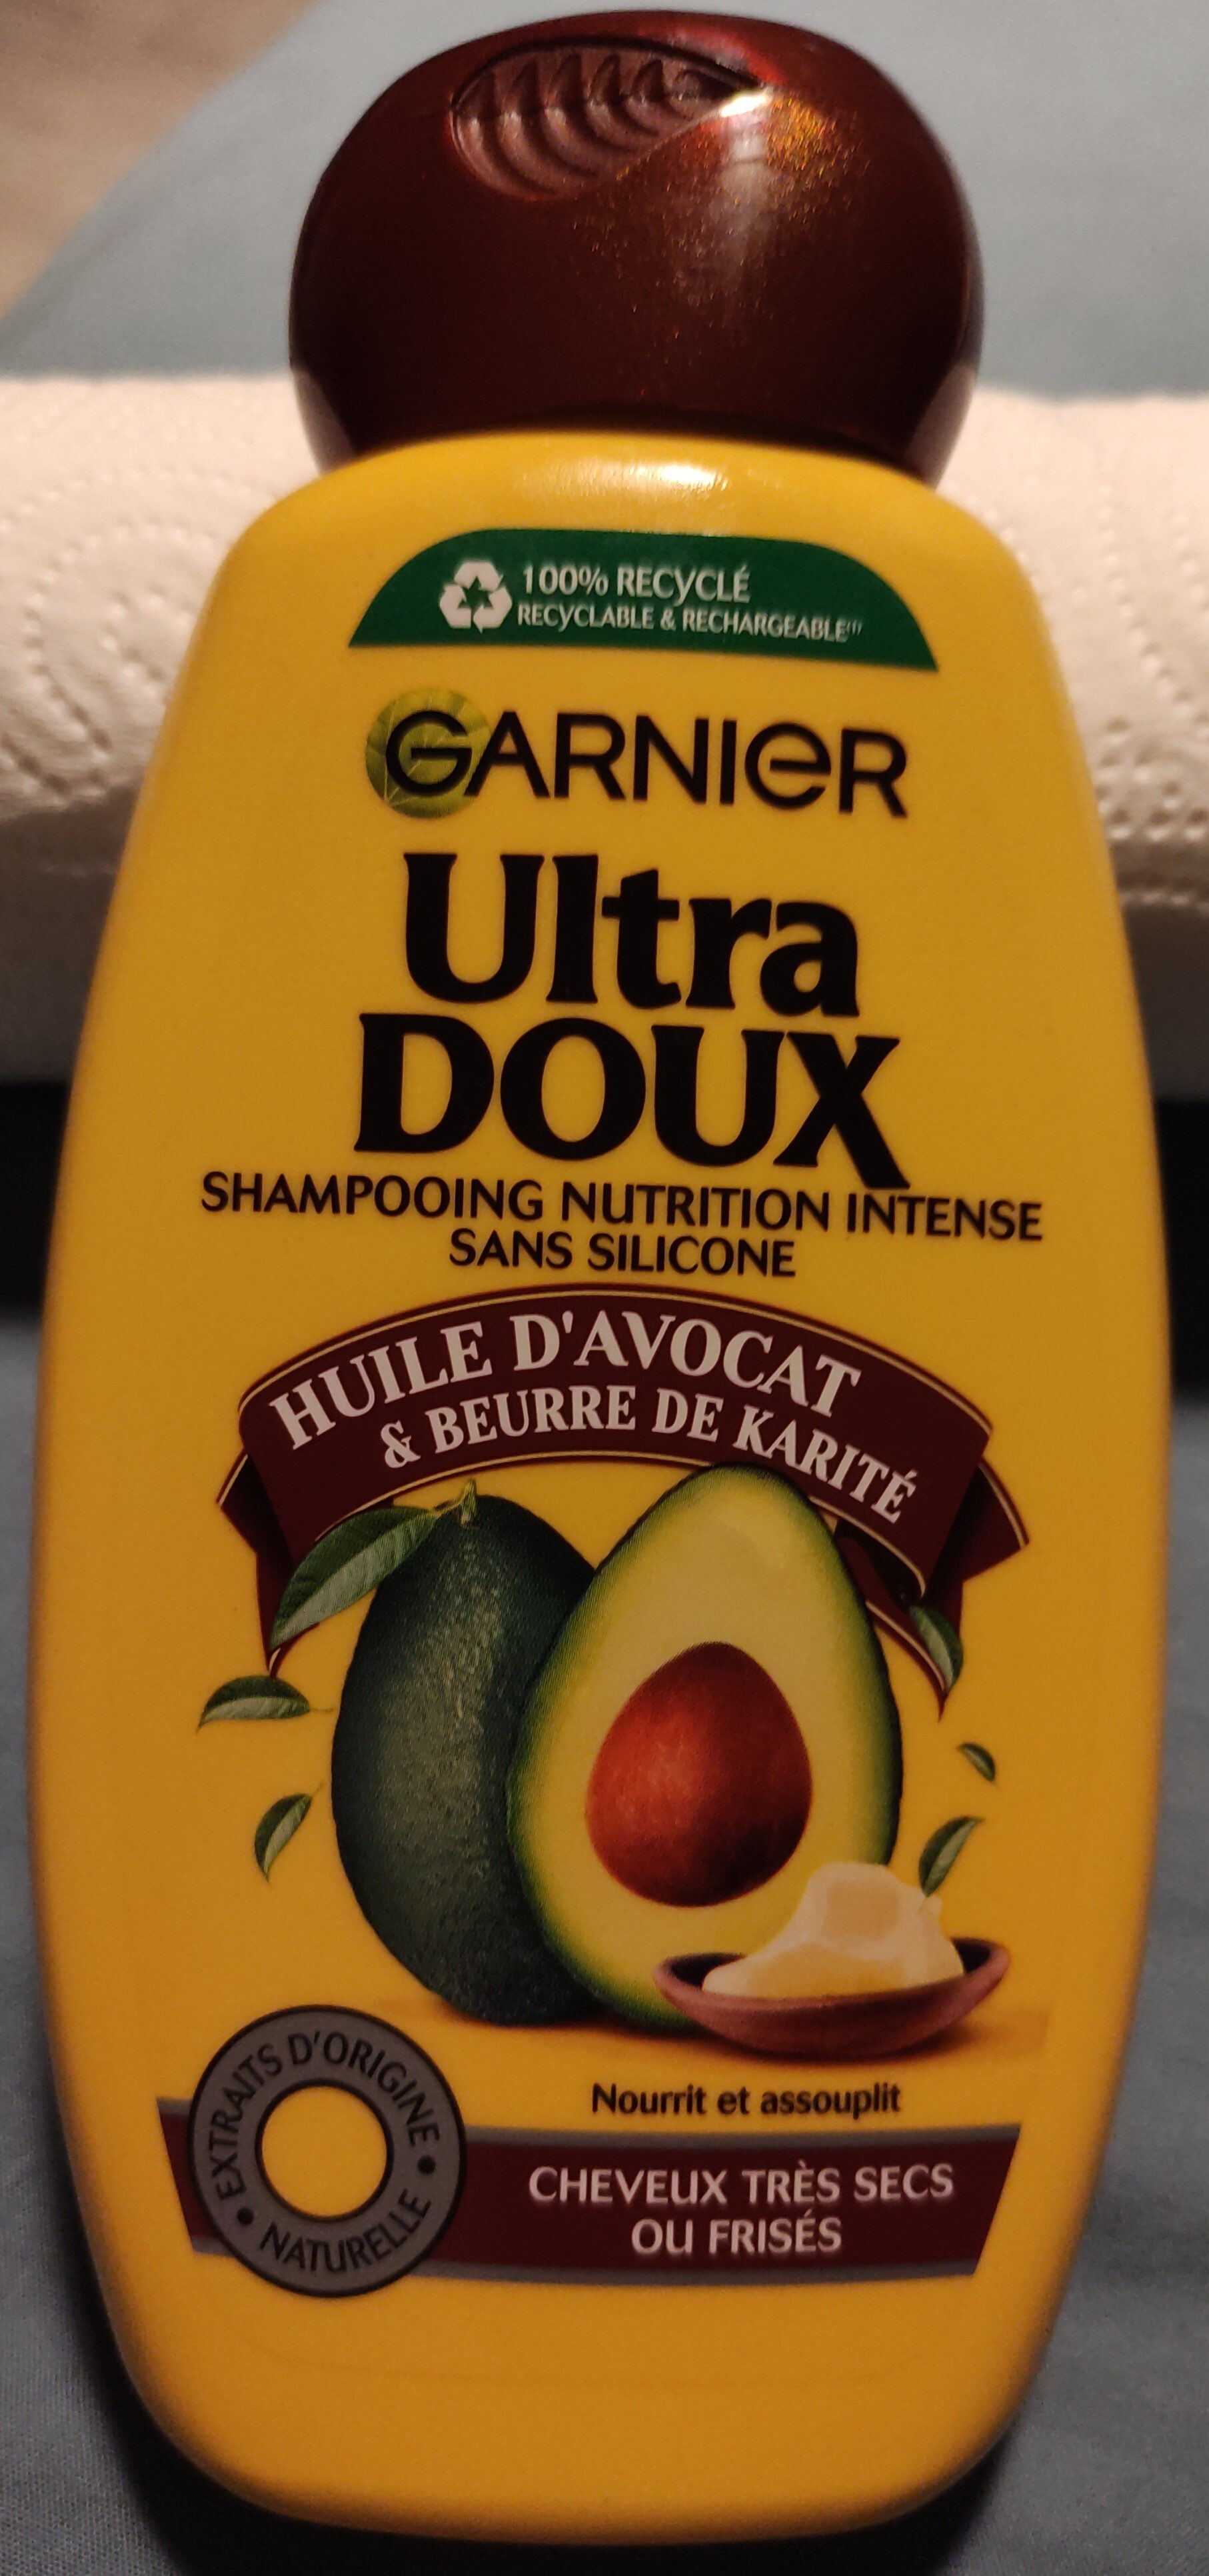 Ultra doux - shampooing nutrition intense sans silicone - Tuote - fr